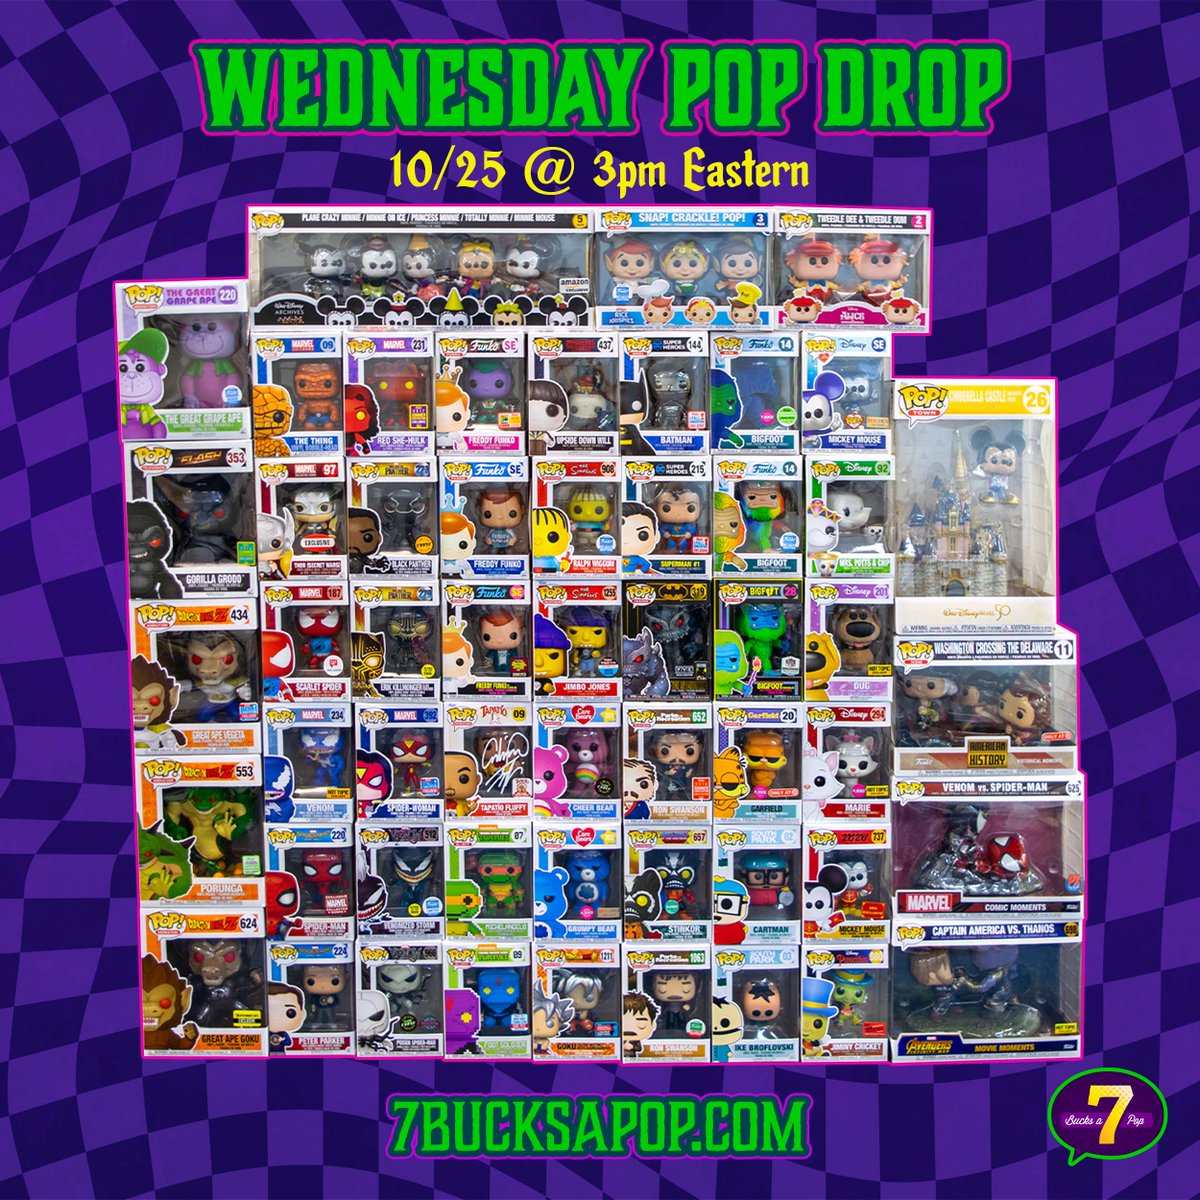 Hey there Funatics! Things are getting spooky around here with Halloween approaching. We have our annual big spooky drop planned for Sunday with all of the scary horror themed Pops and more. In the meantime, we have a frightfully fun Wednesday Pop Drop today. DID YOU KNOW - we…